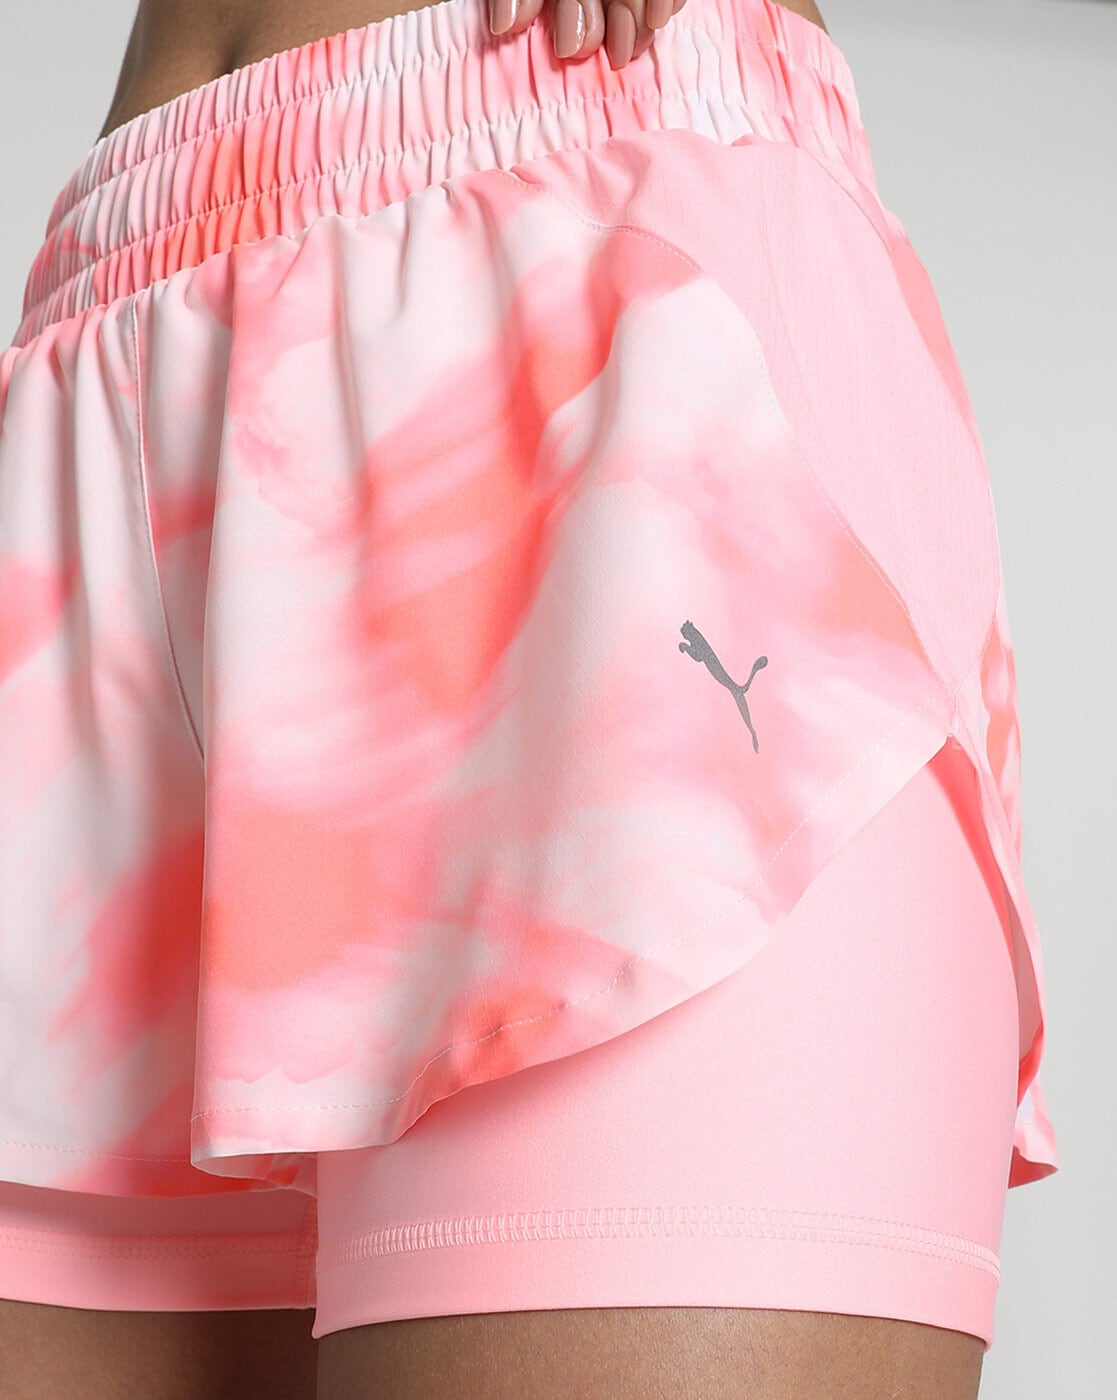 PUMA Pink Koral for Shorts Buy Women Online by Ice